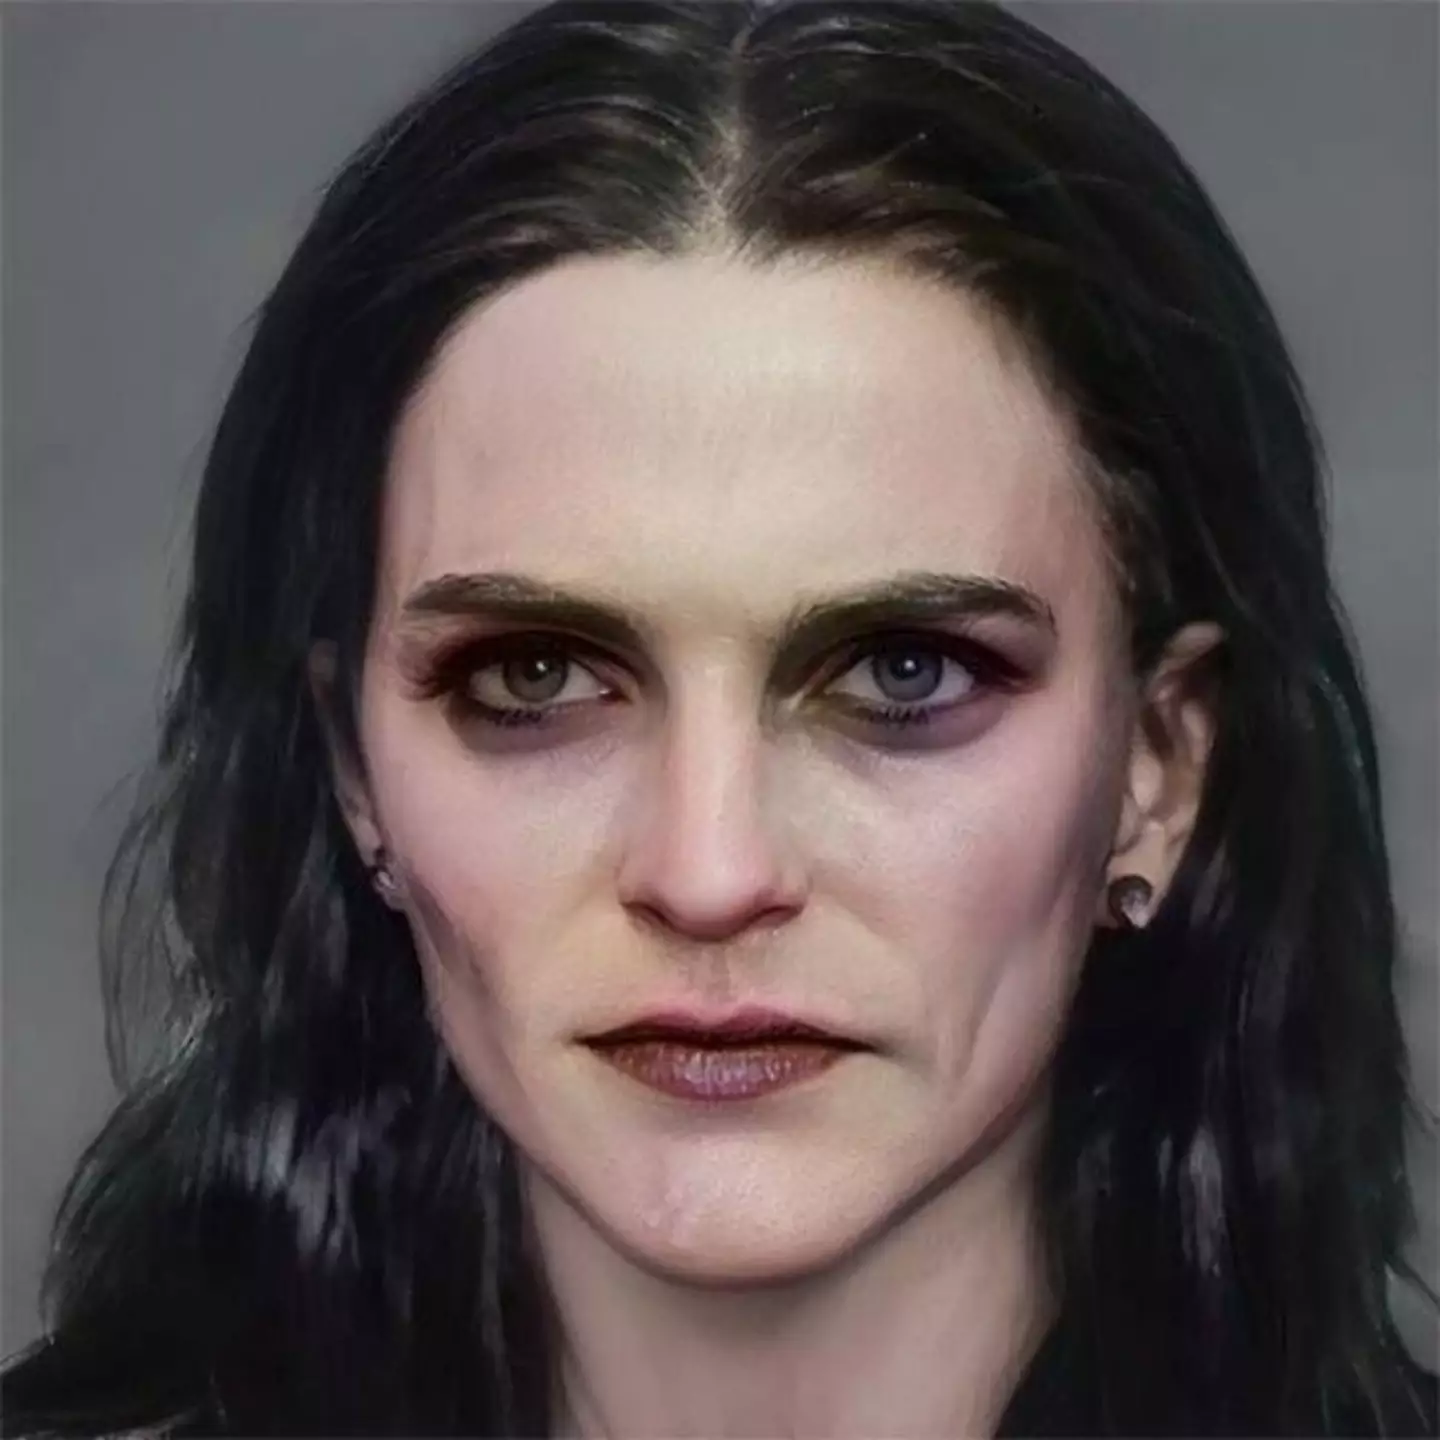 Bellatrix looked ready for a night out, thanks to the AI.